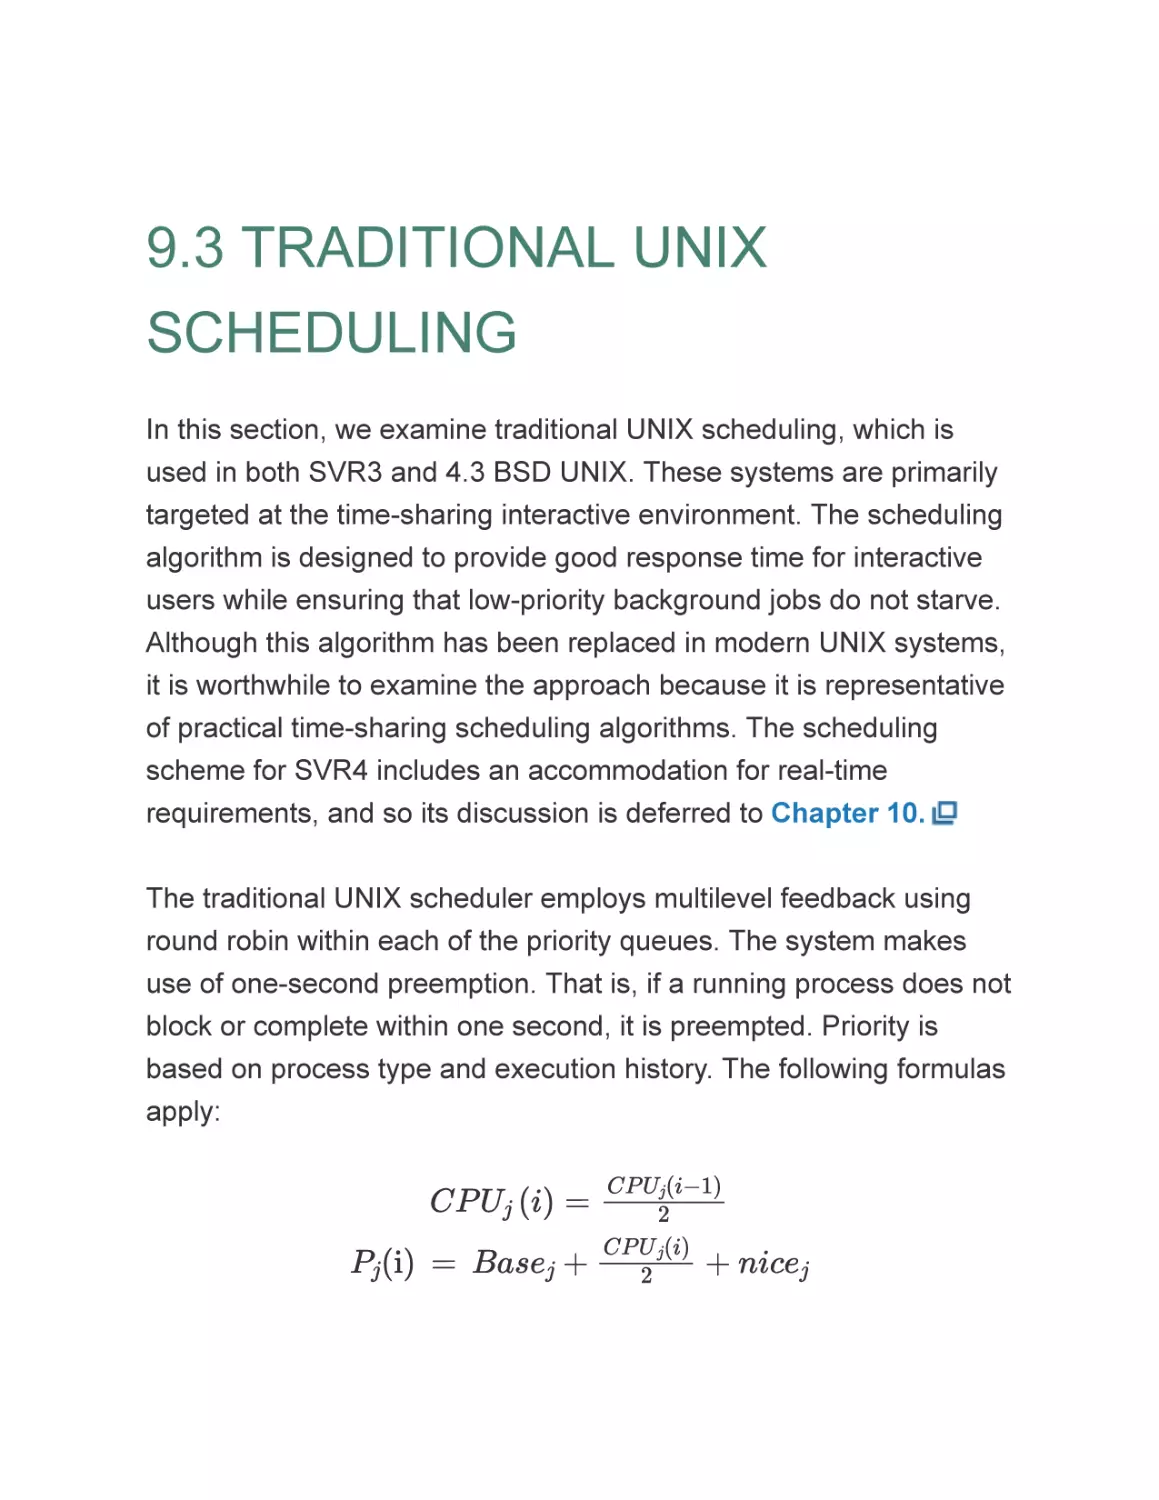 9.3 TRADITIONAL UNIX SCHEDULING